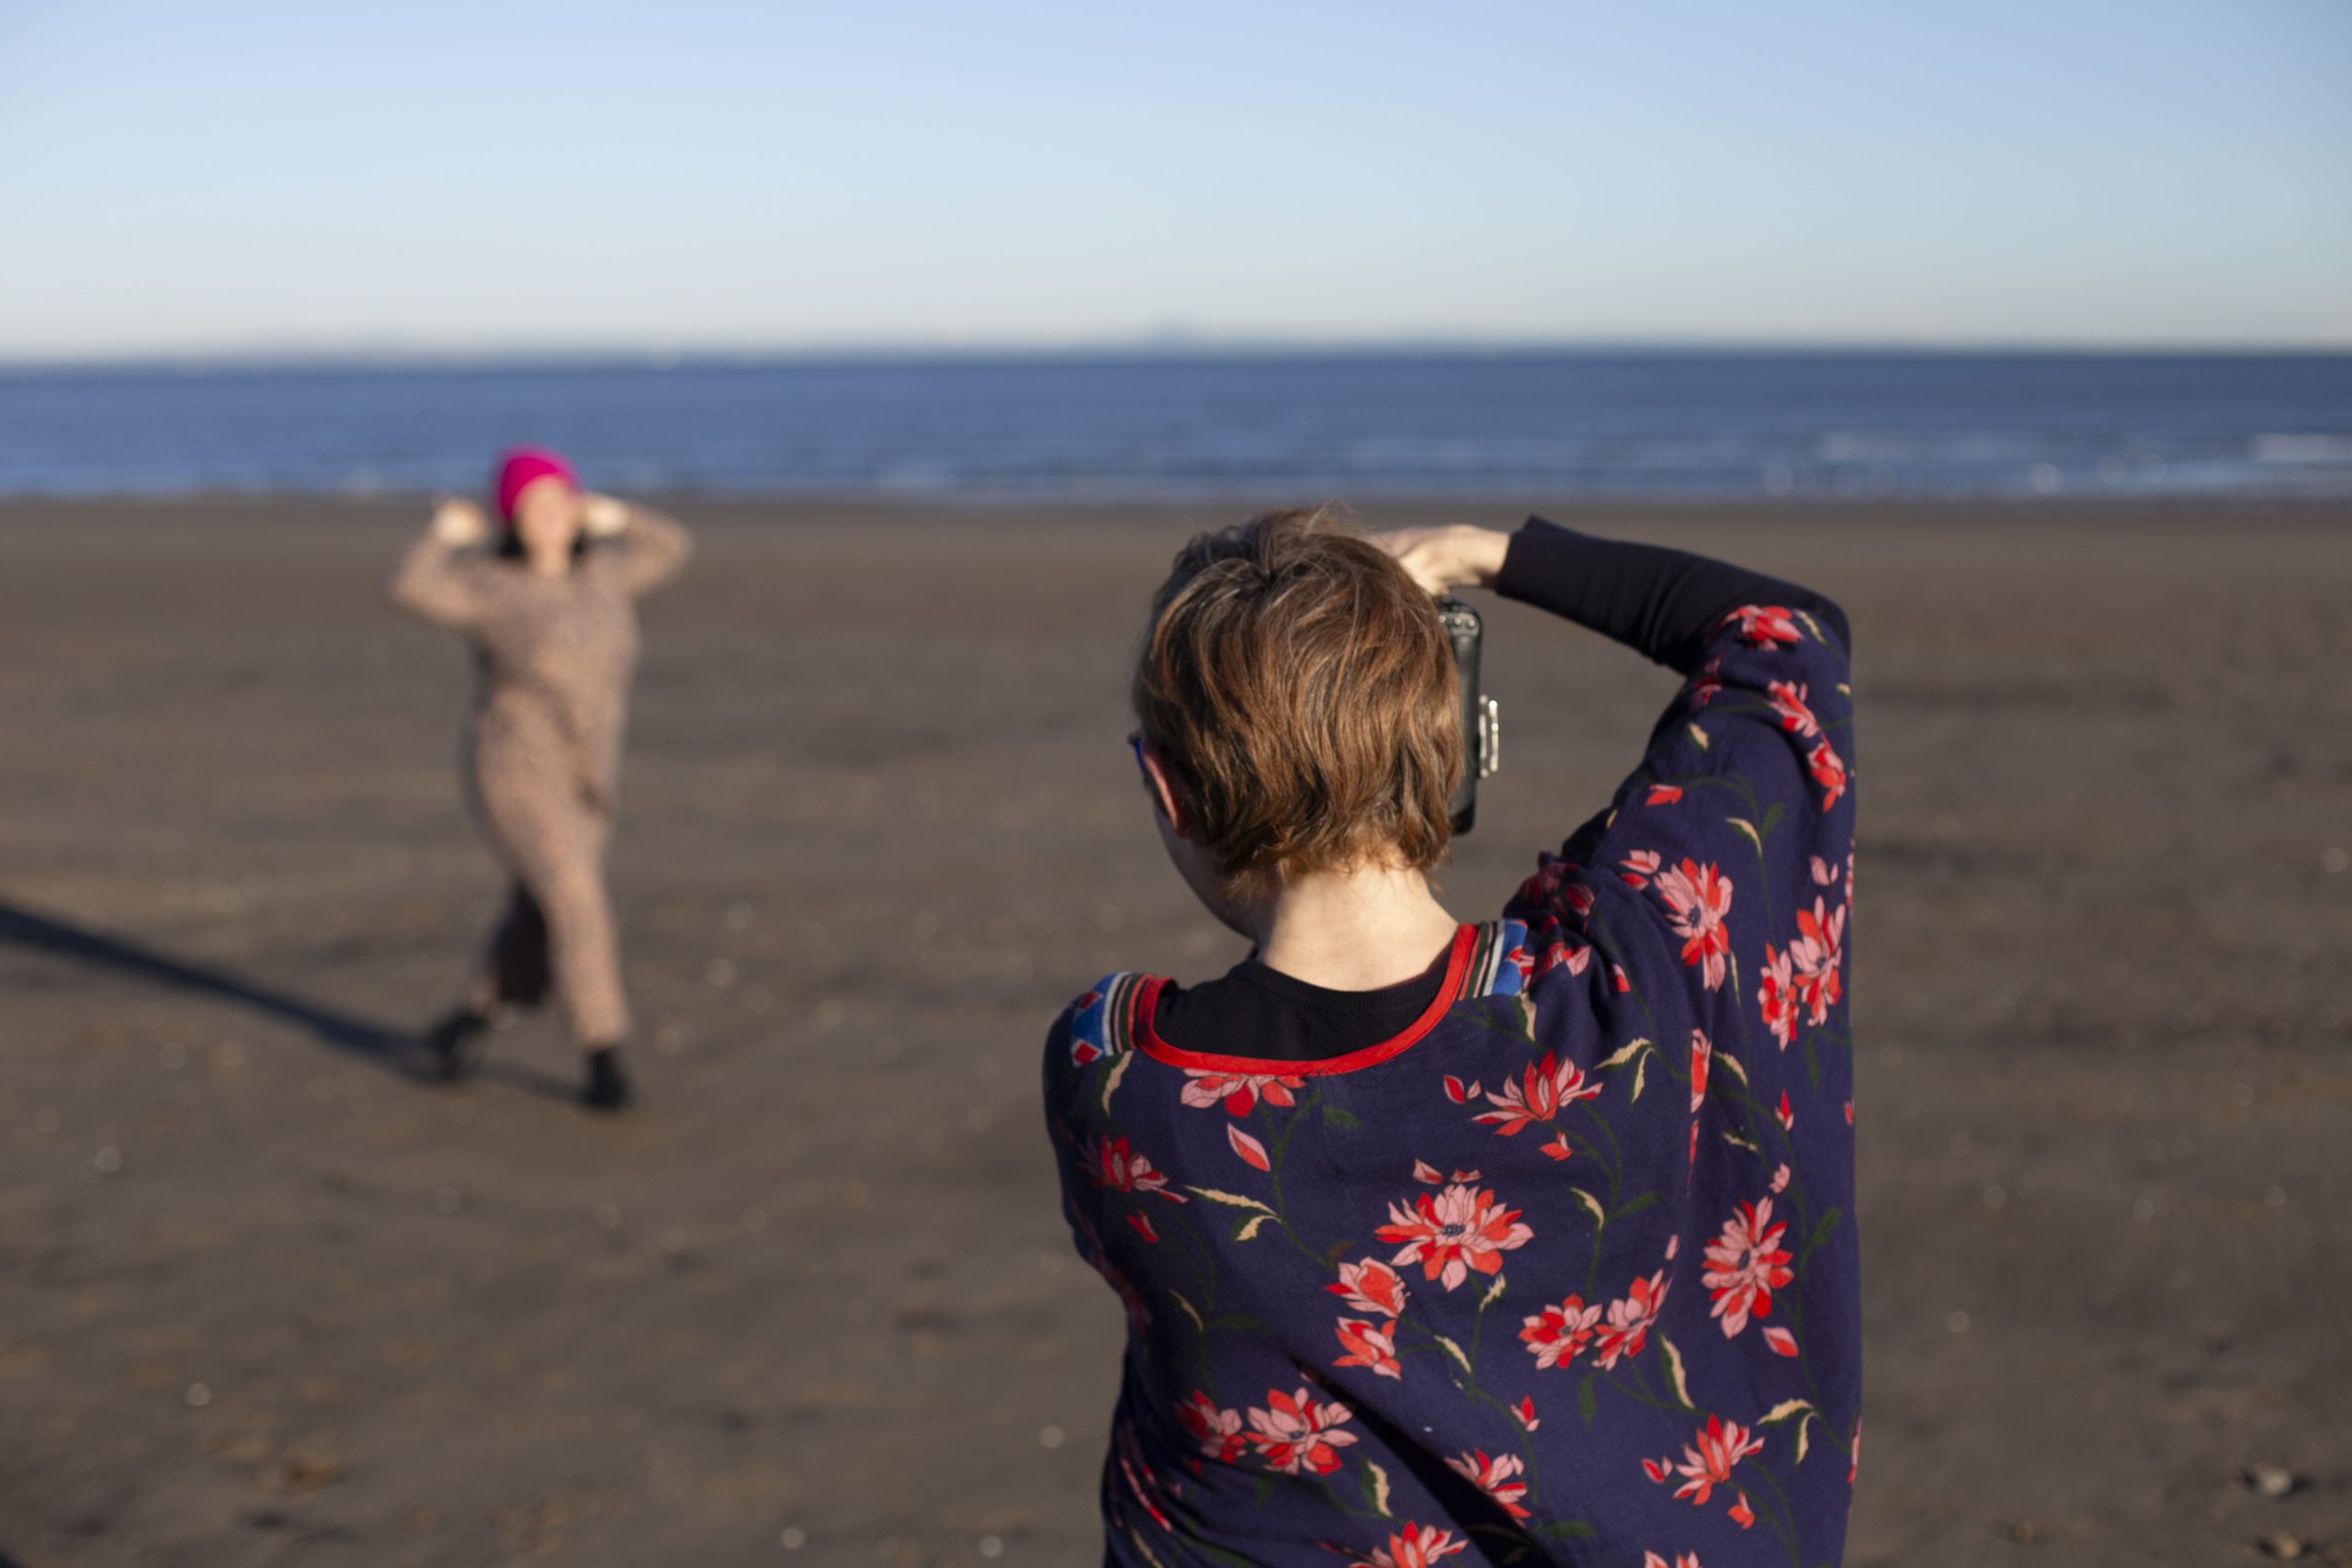 photographer takes a photo of a lady in a pink hat and jumpsuit dancing on the beach